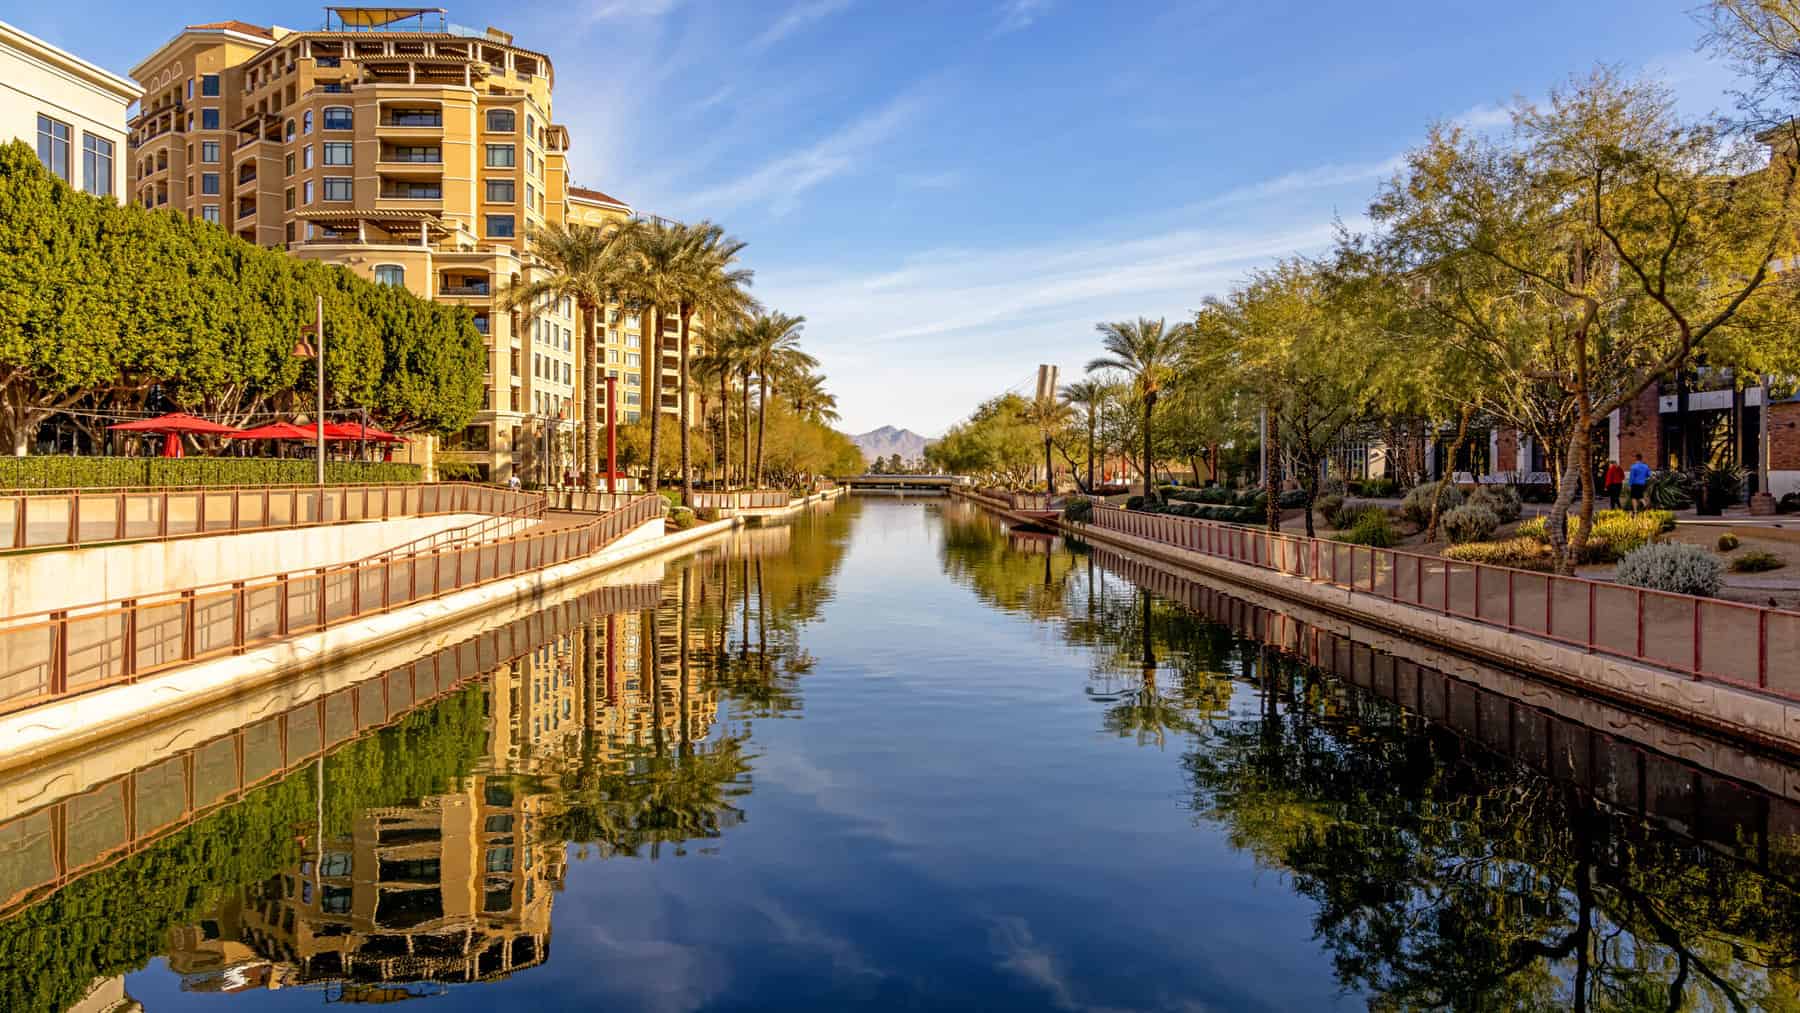 Daytime scene of canal running through waterfront district of Old Town Scottsdale, Arizona USA with condo housing, retail and restaurants